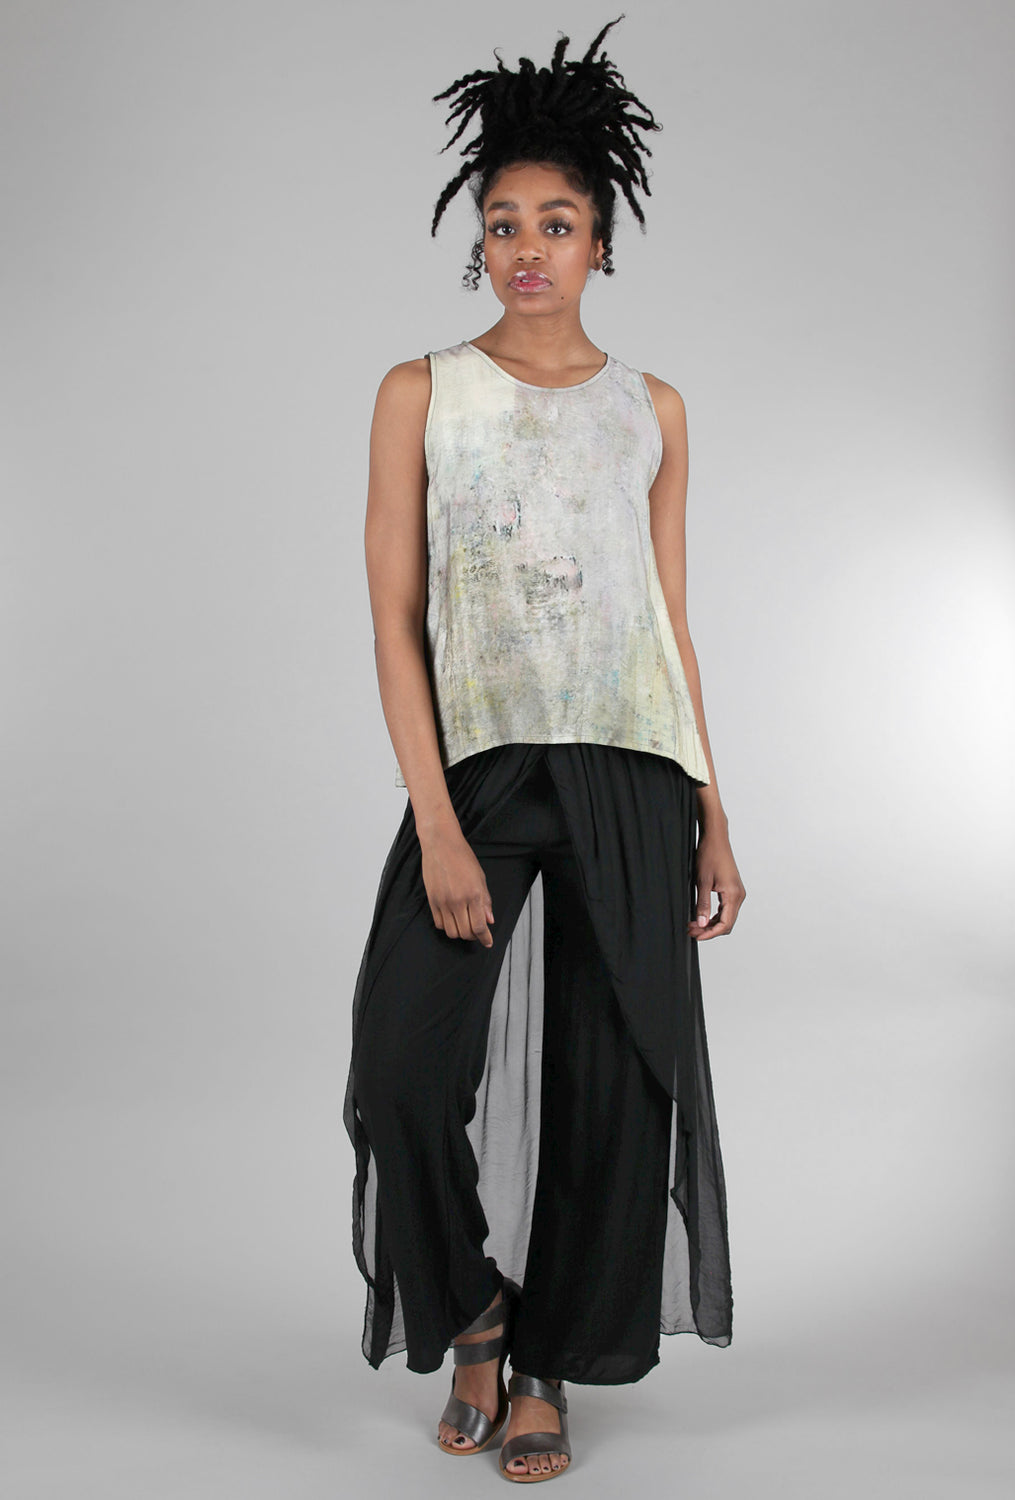 Our Plus High Waist Long Palazzo Overlay Skirt Pants is such a vibe - ROMWE